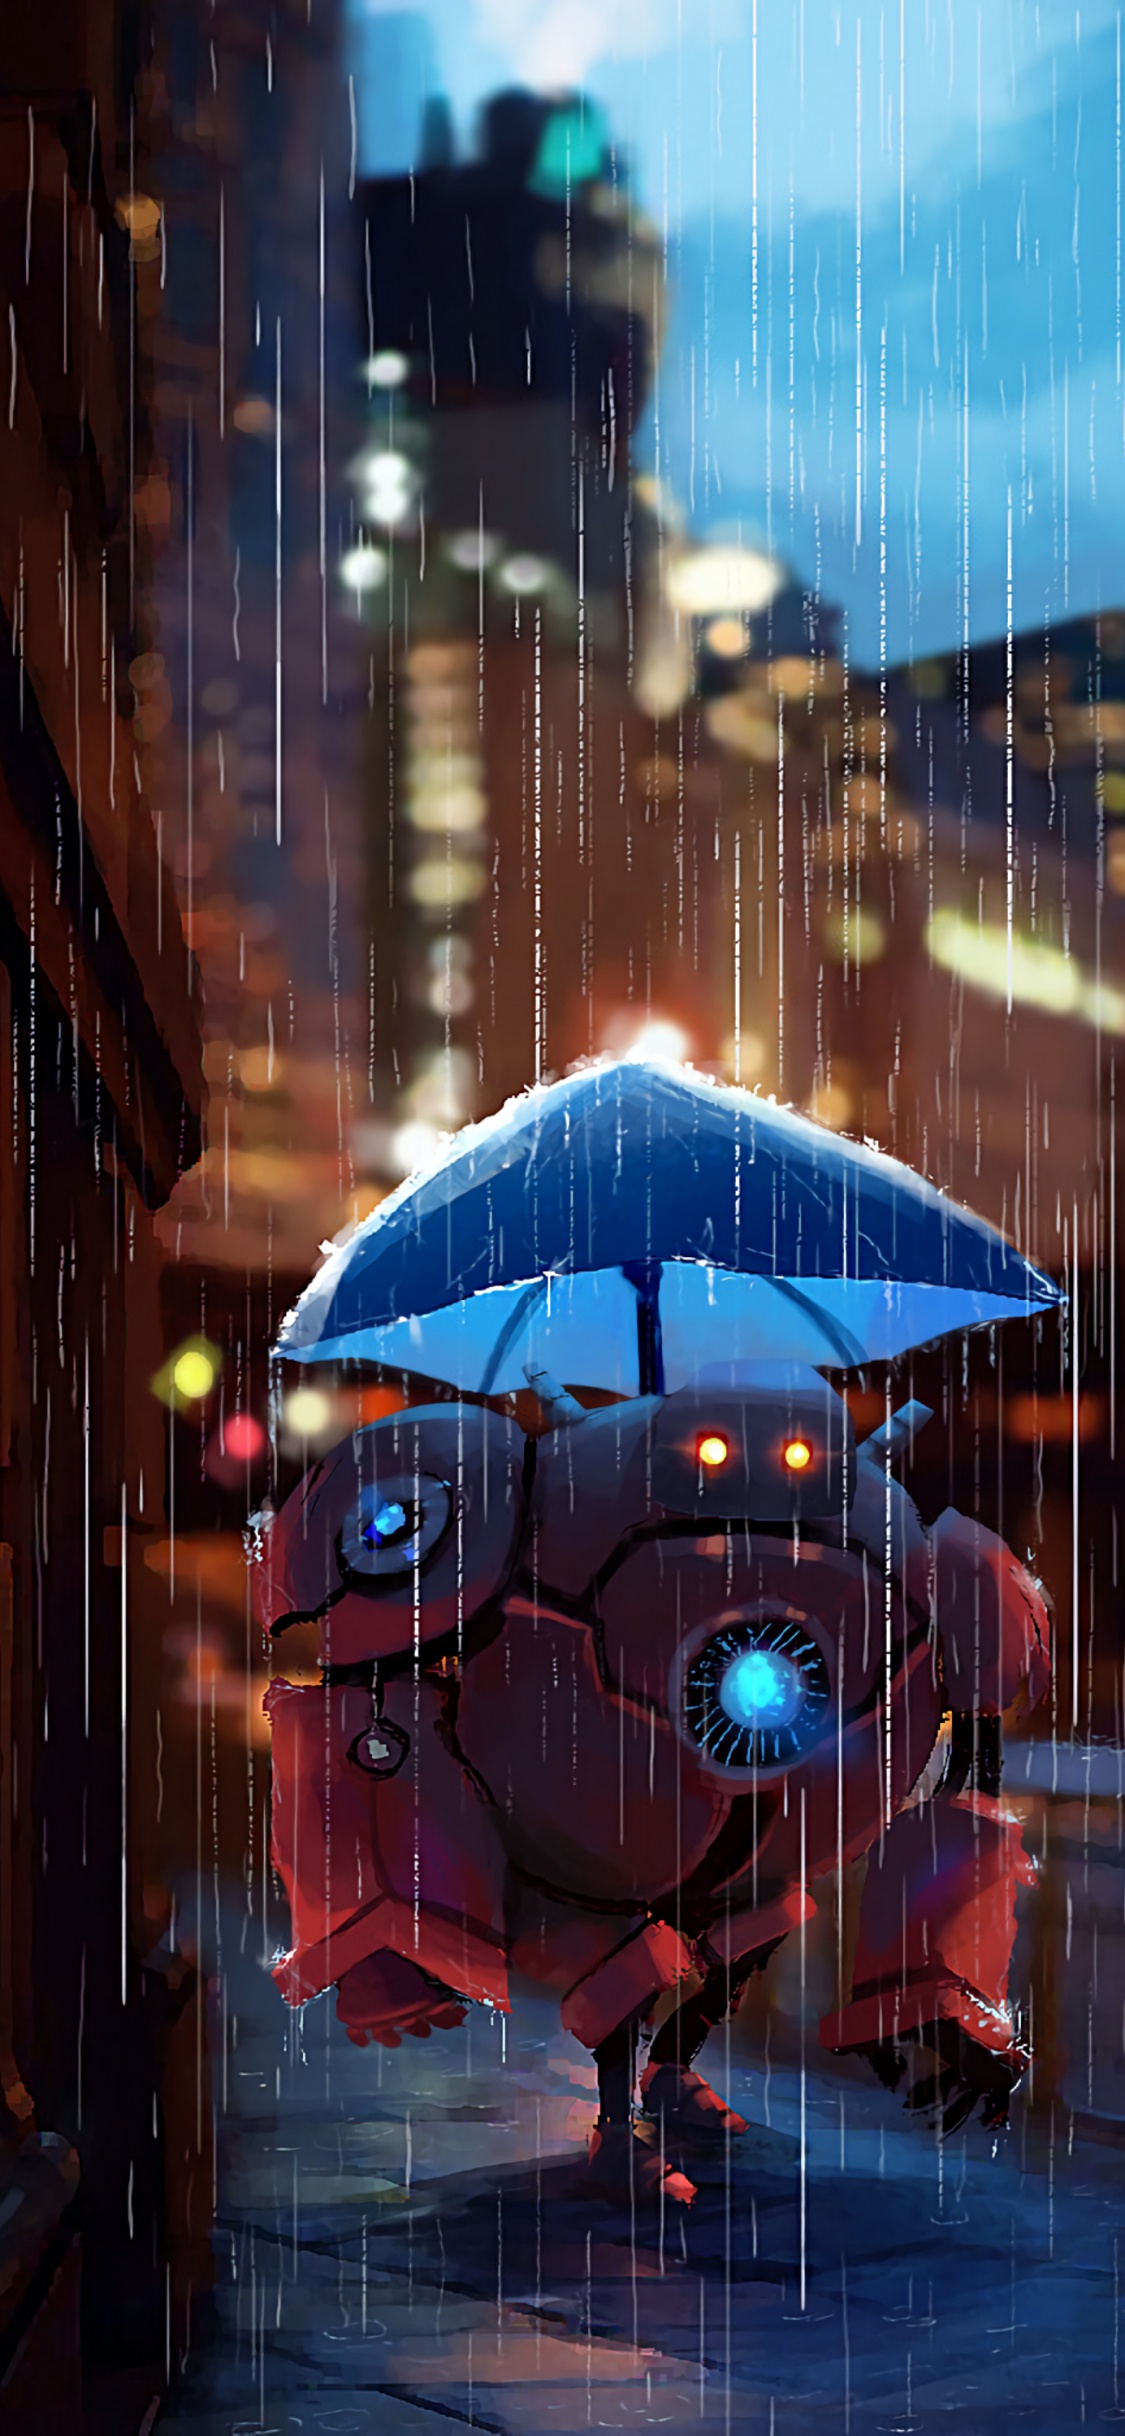 Blue Umbrella in The City During Night Time. Wallpaper in 1125x2436 Resolution